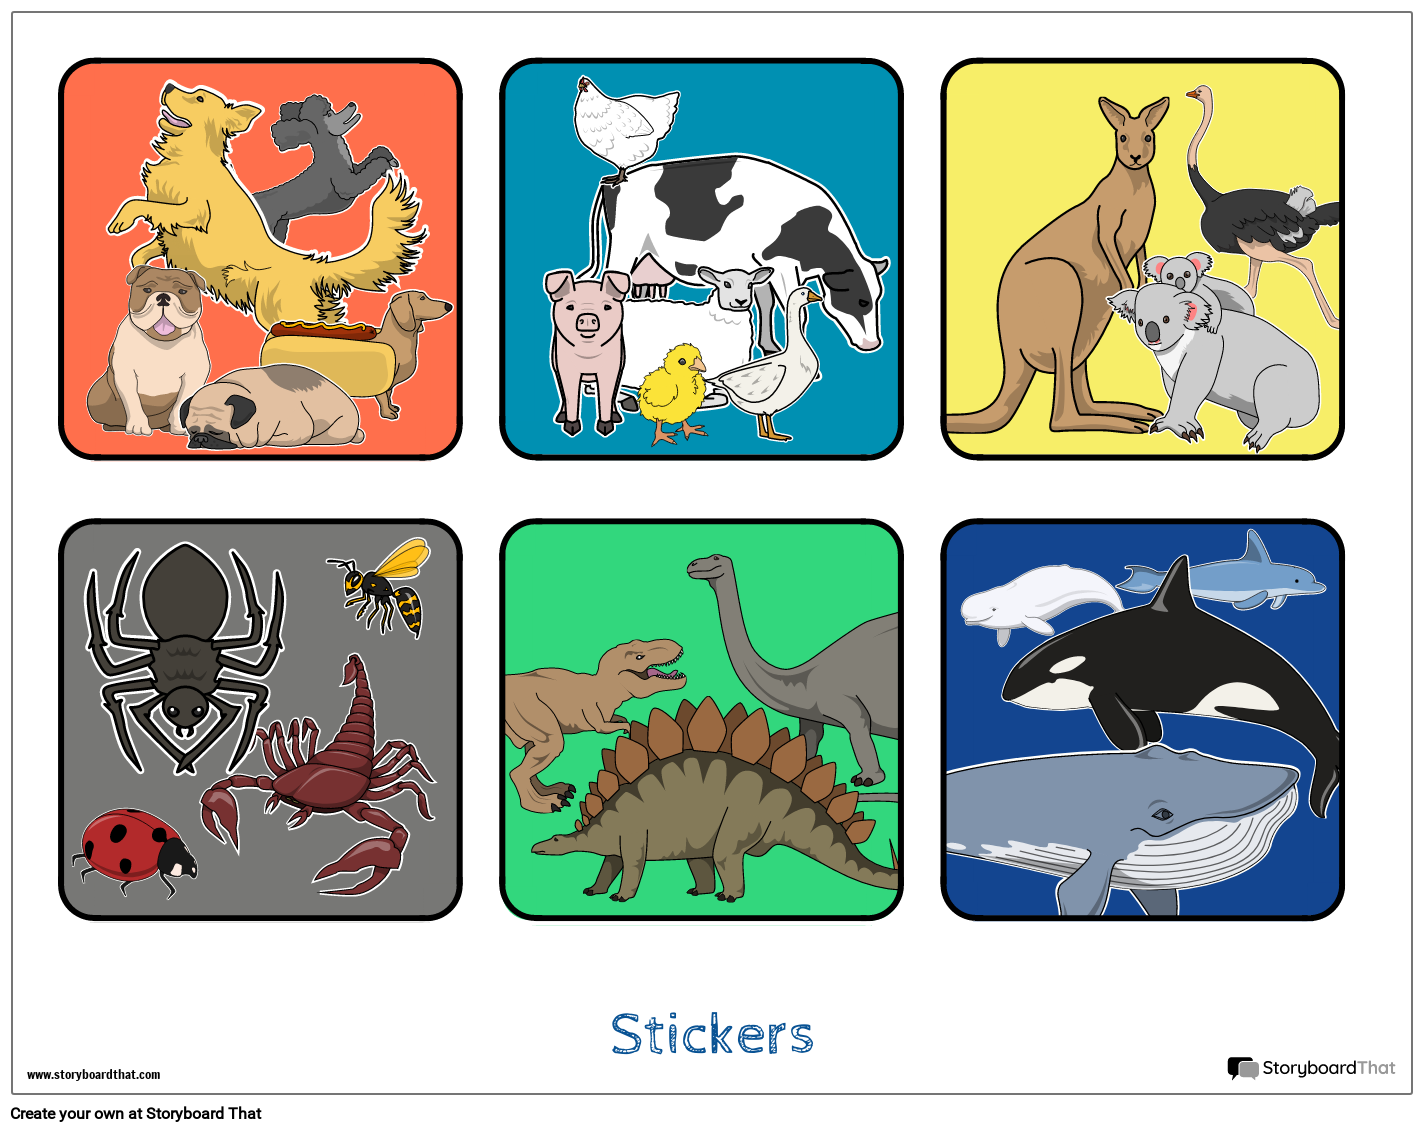 New Create Page Stickers Template 3